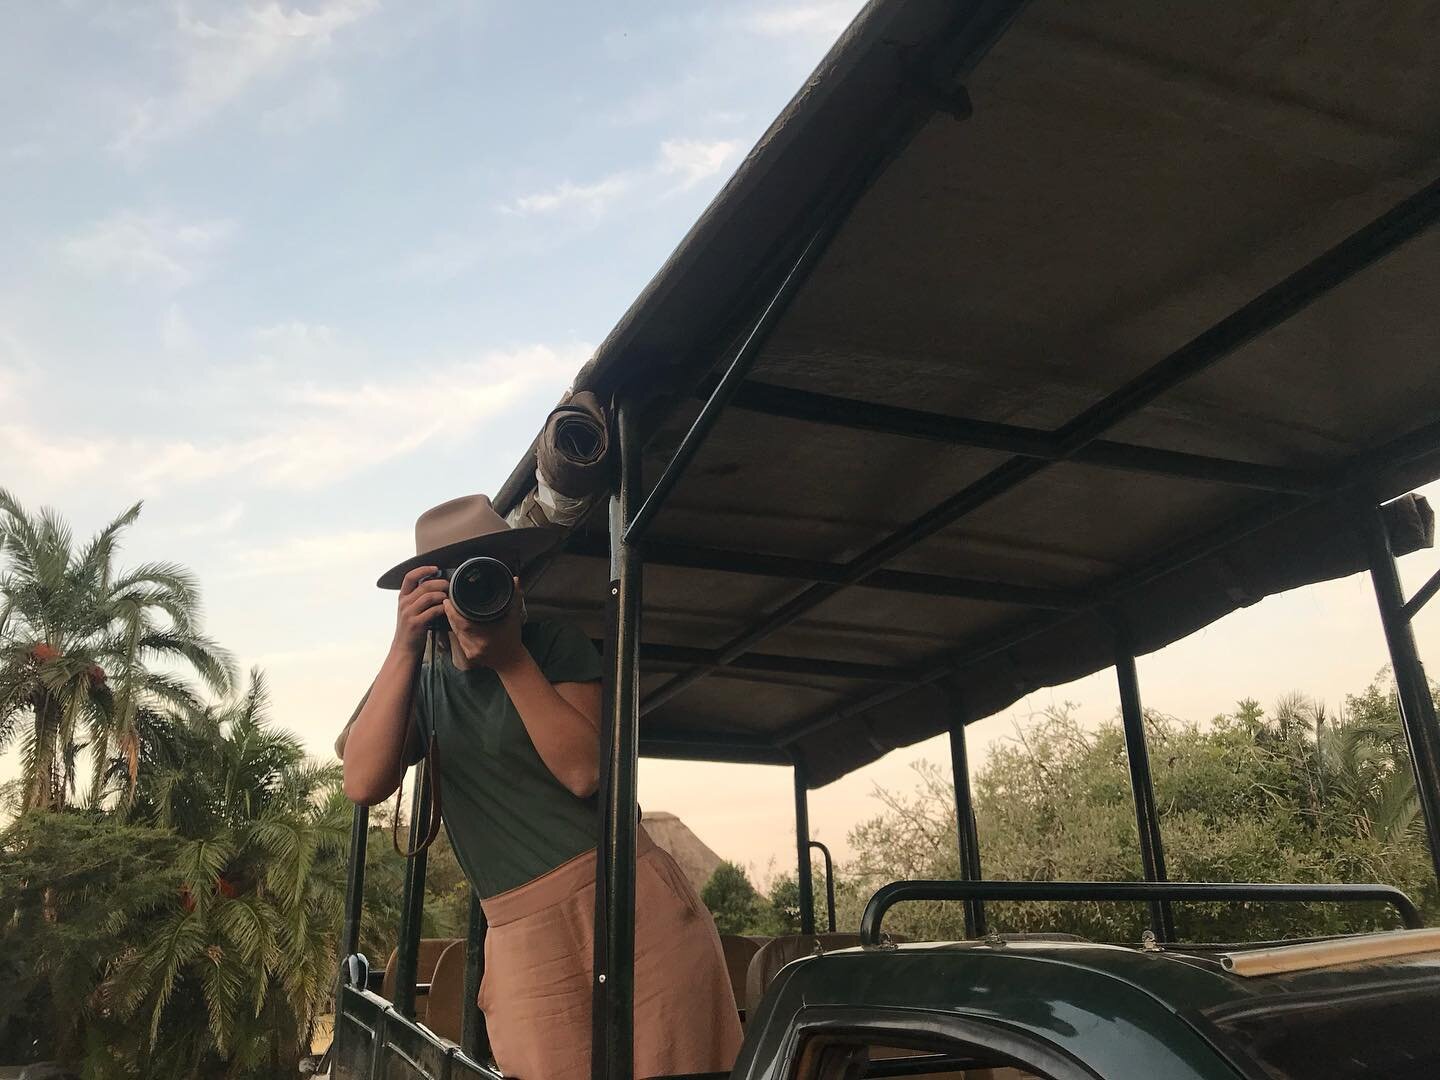 It&rsquo;s world photography day! Celebrating with this photo of me in South Africa about to safari with my pops. Photography is my happy place and what keeps me going. What keeps you going and makes you the most happy?